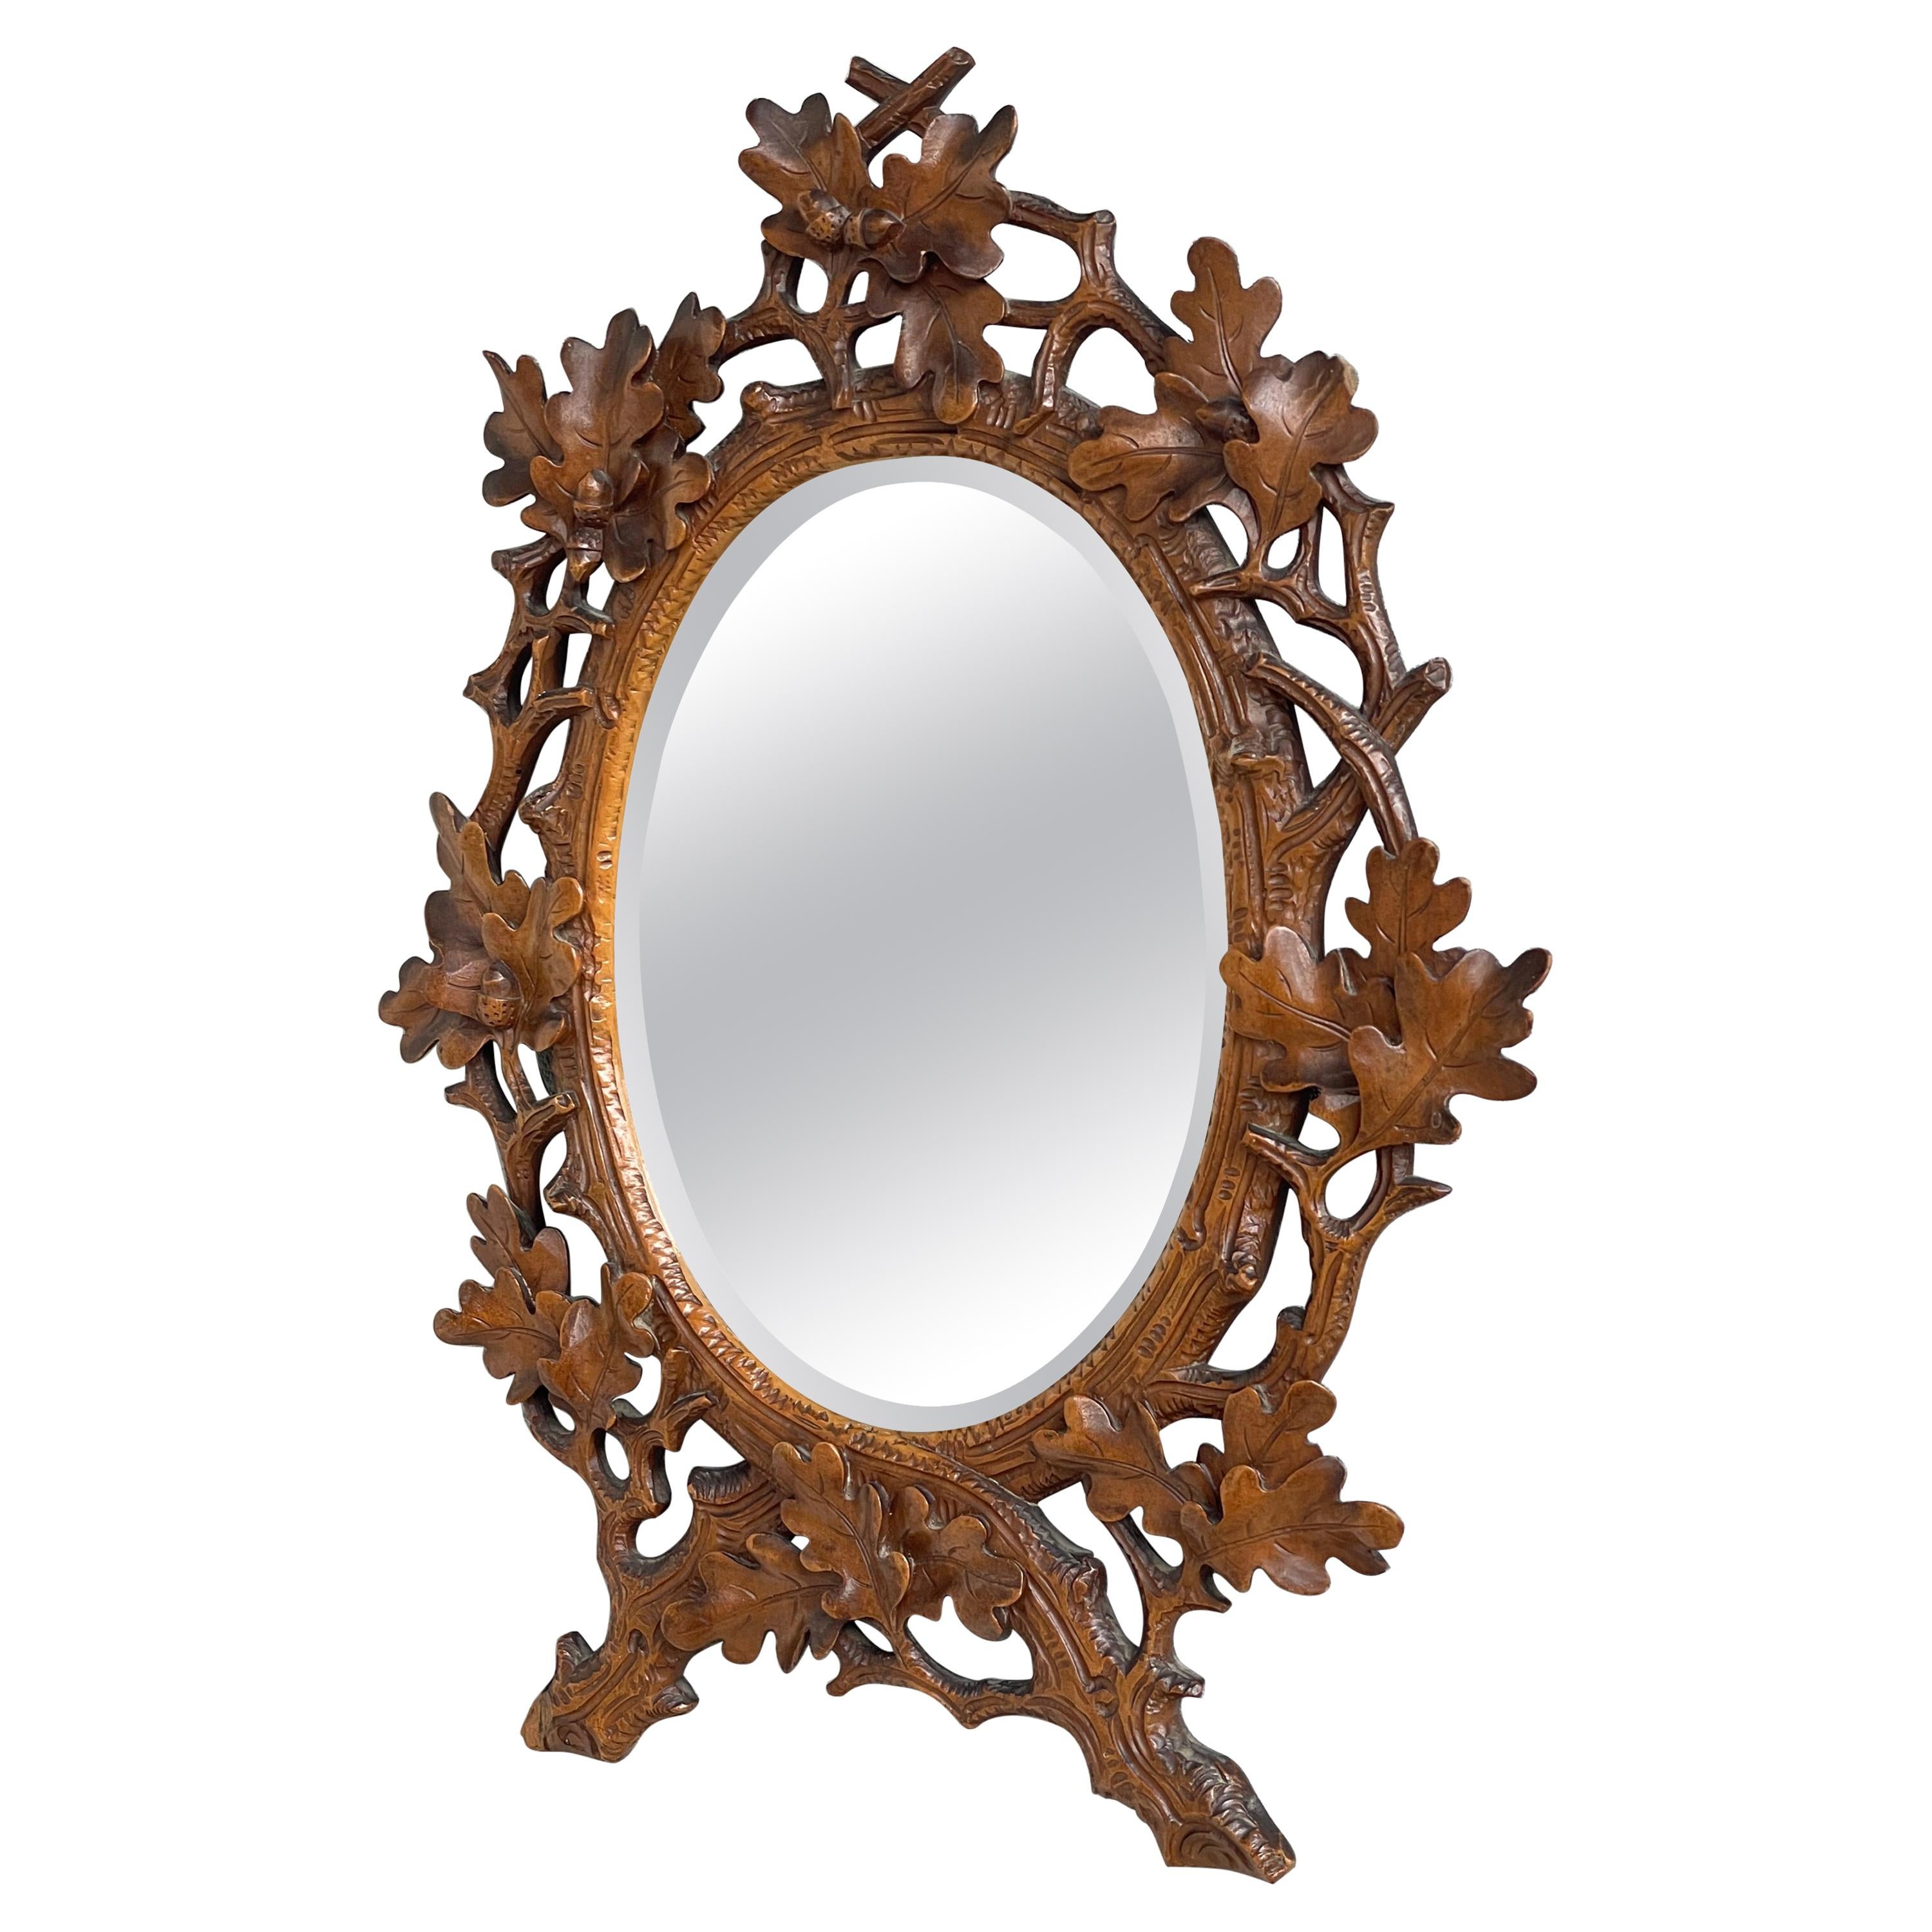 Stunning Little, Finest Quality Hand Carved Antique Black Forest Wall Mirror